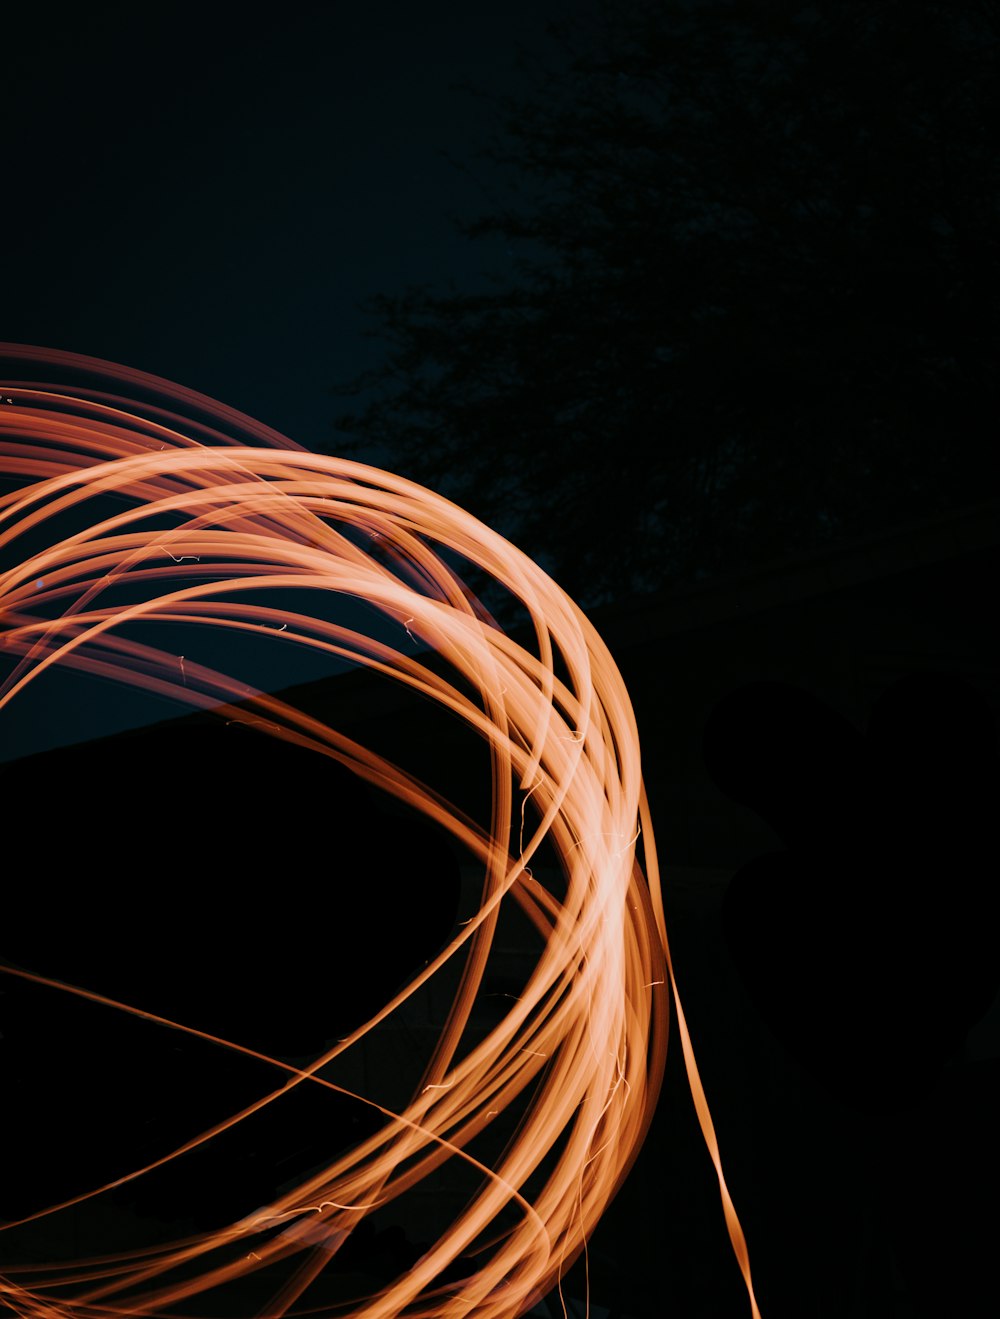 a long exposure of a fire hose on a black background